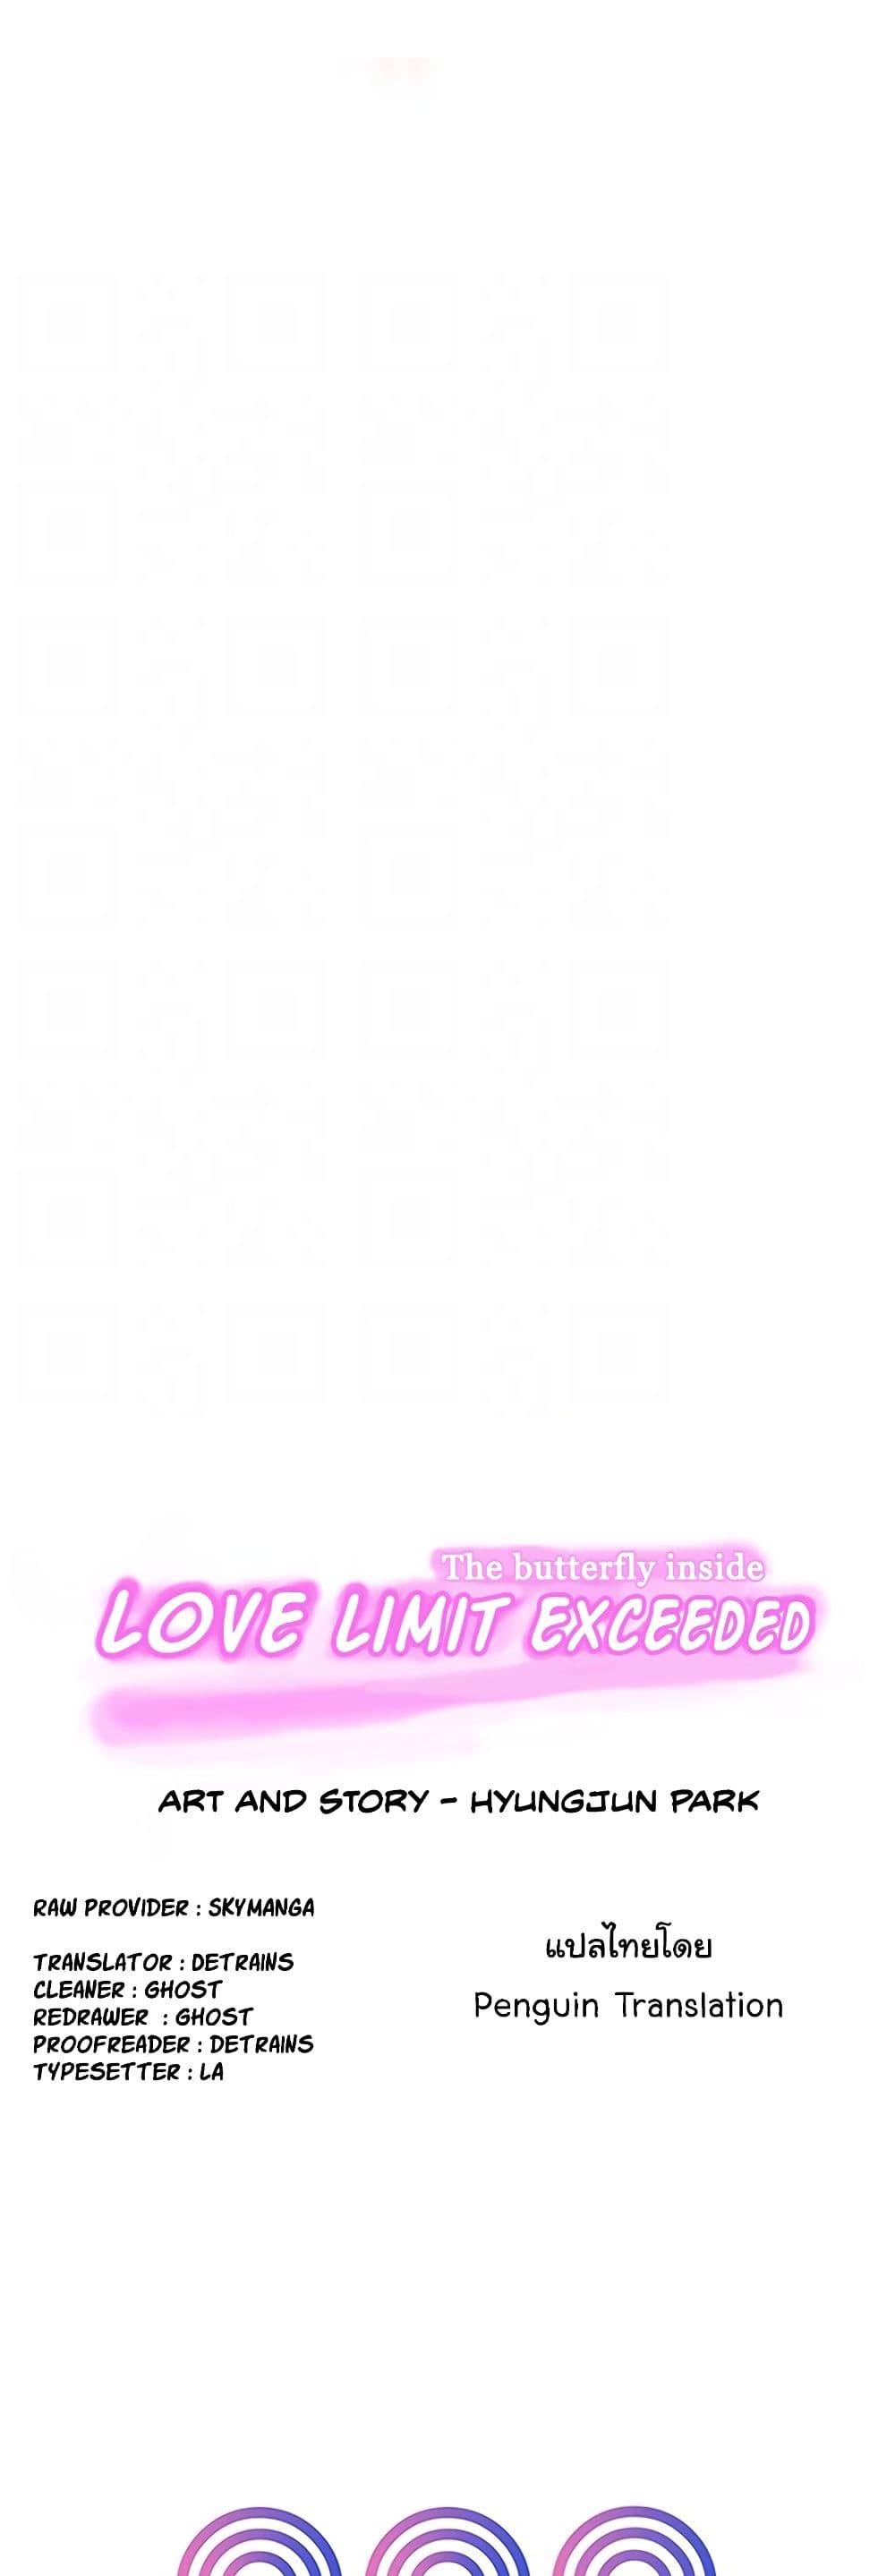 Love Limit Exceeded 9 (7)